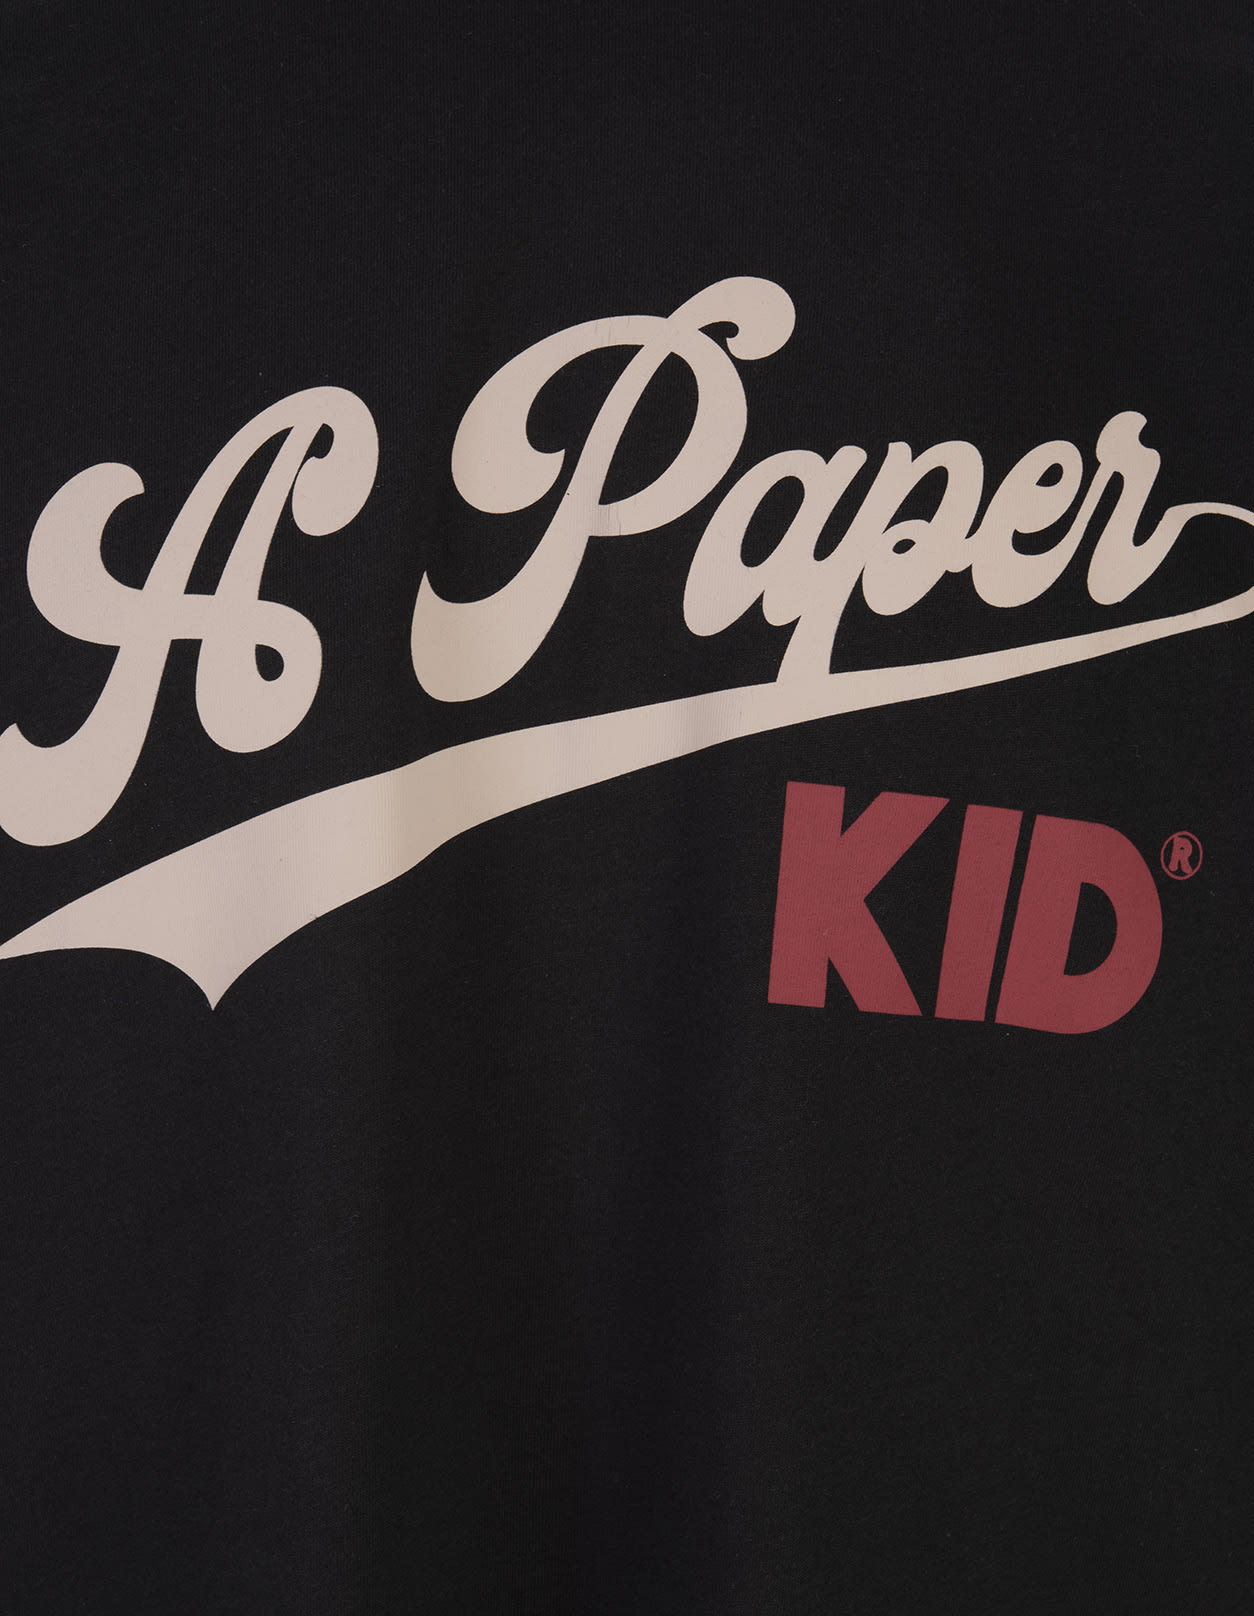 Shop A Paper Kid Black T-shirt With  Graphic Print